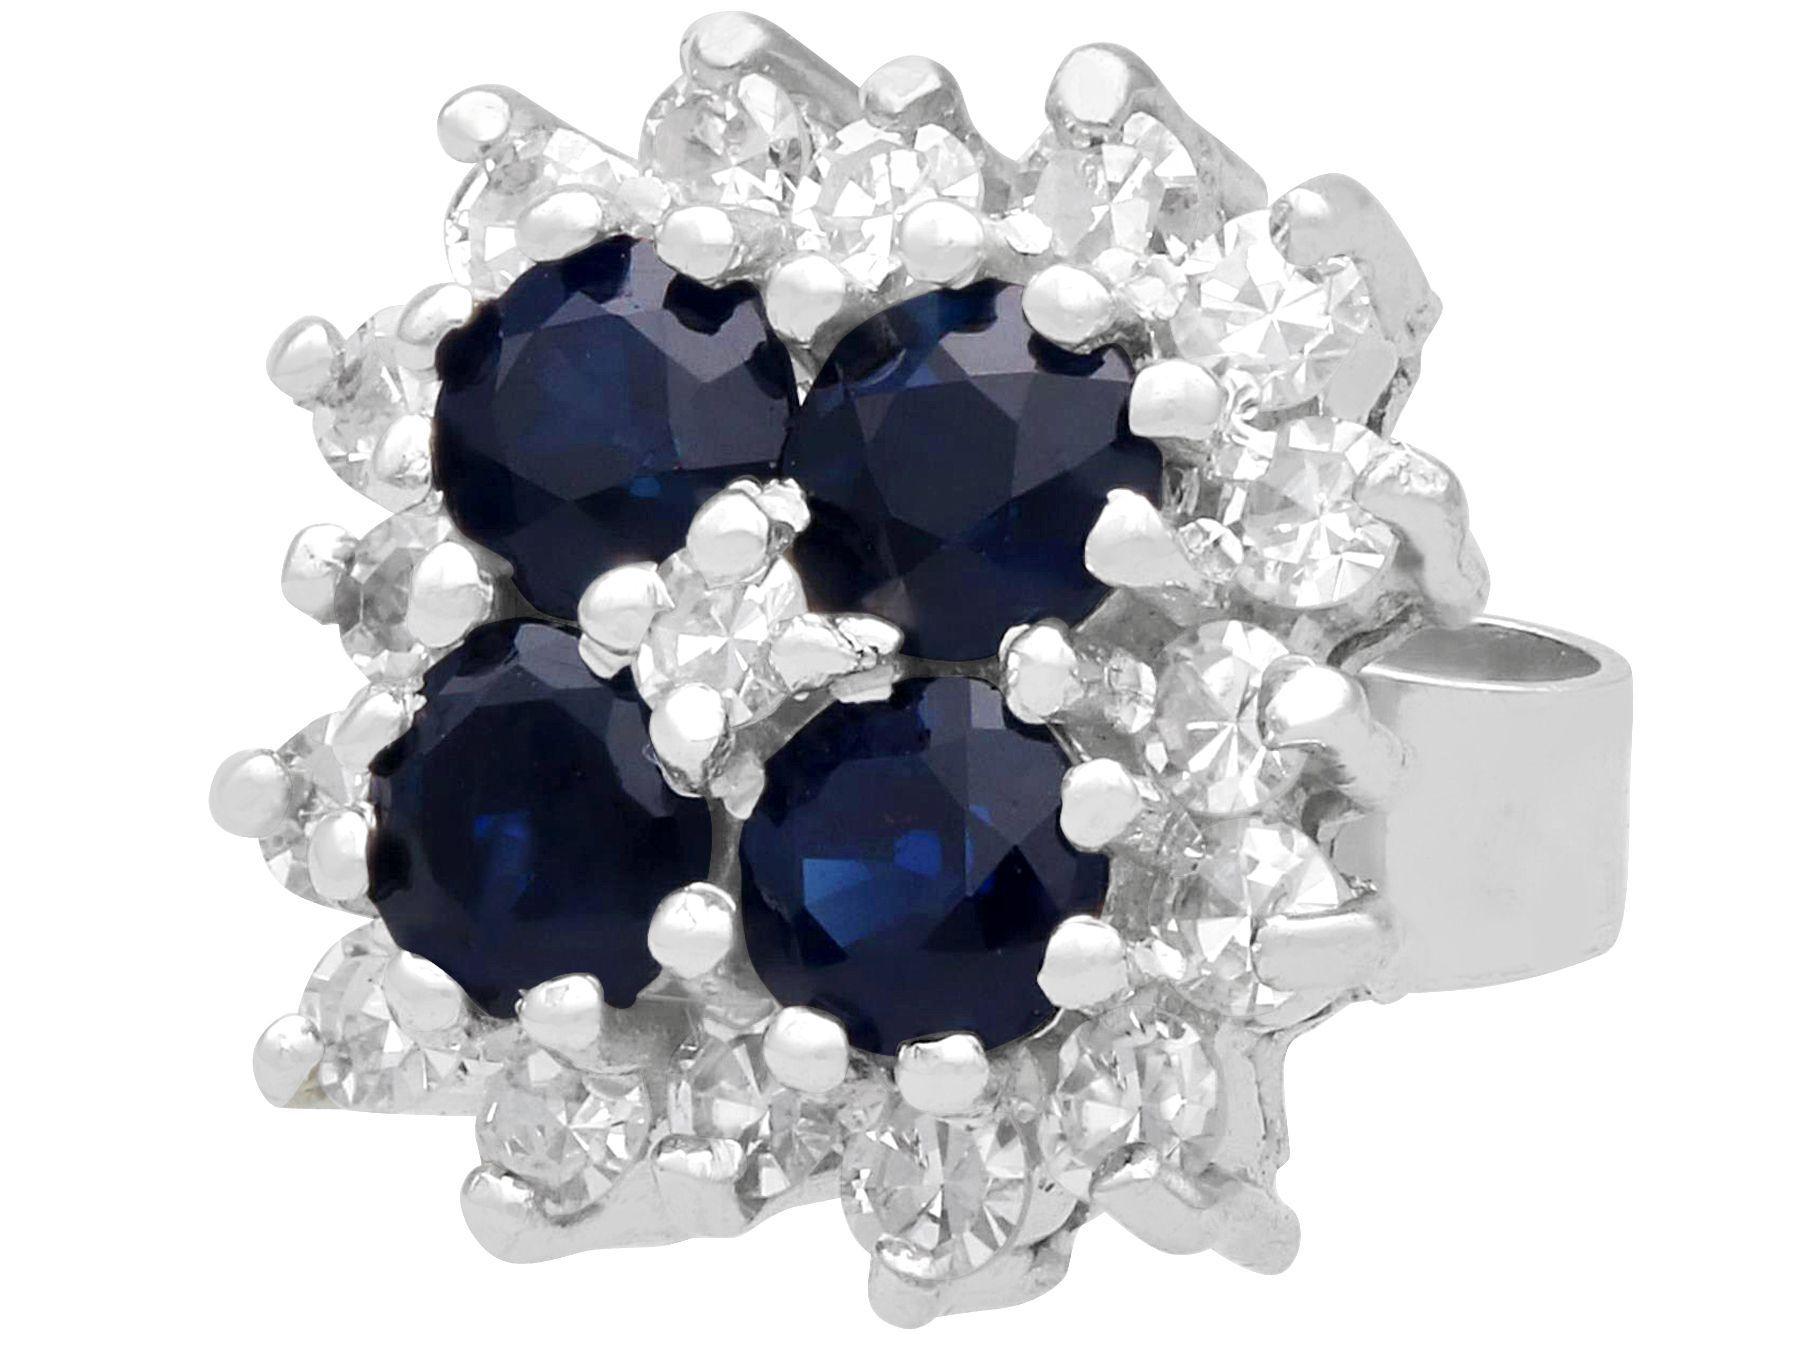 A fine and impressive pair of 0.75 carat sapphire and 0.51 carat diamond, 18 karat white gold stud earrings; part of our diverse gemstone jewellery collections

These fine and impressive sapphire and diamond earrings have been crafted in 18k white